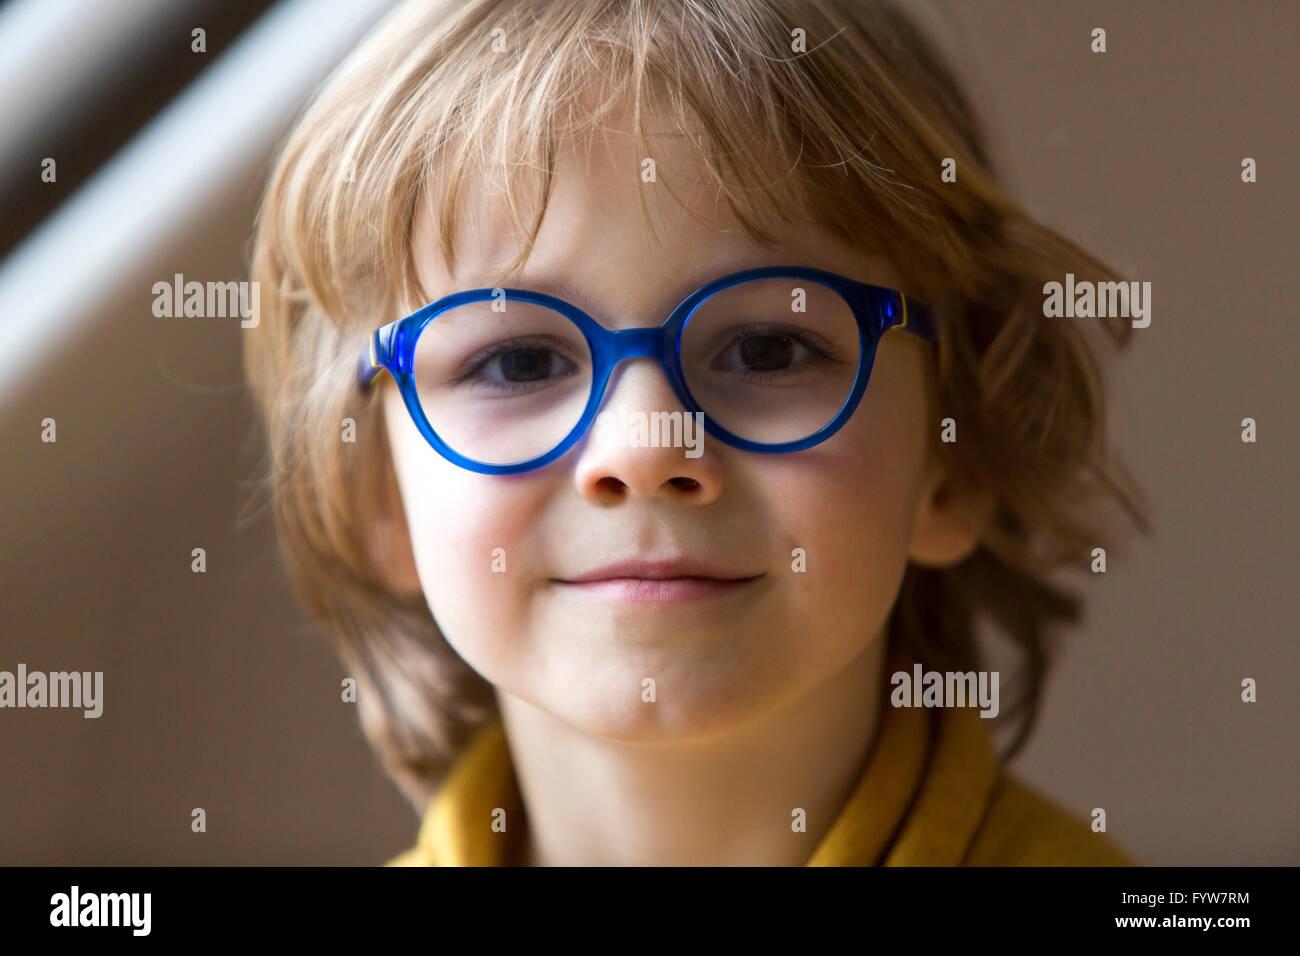 Young boy, 6 years old, looks friendly, smiles, with glasses, with a blue frame, Stock Photo